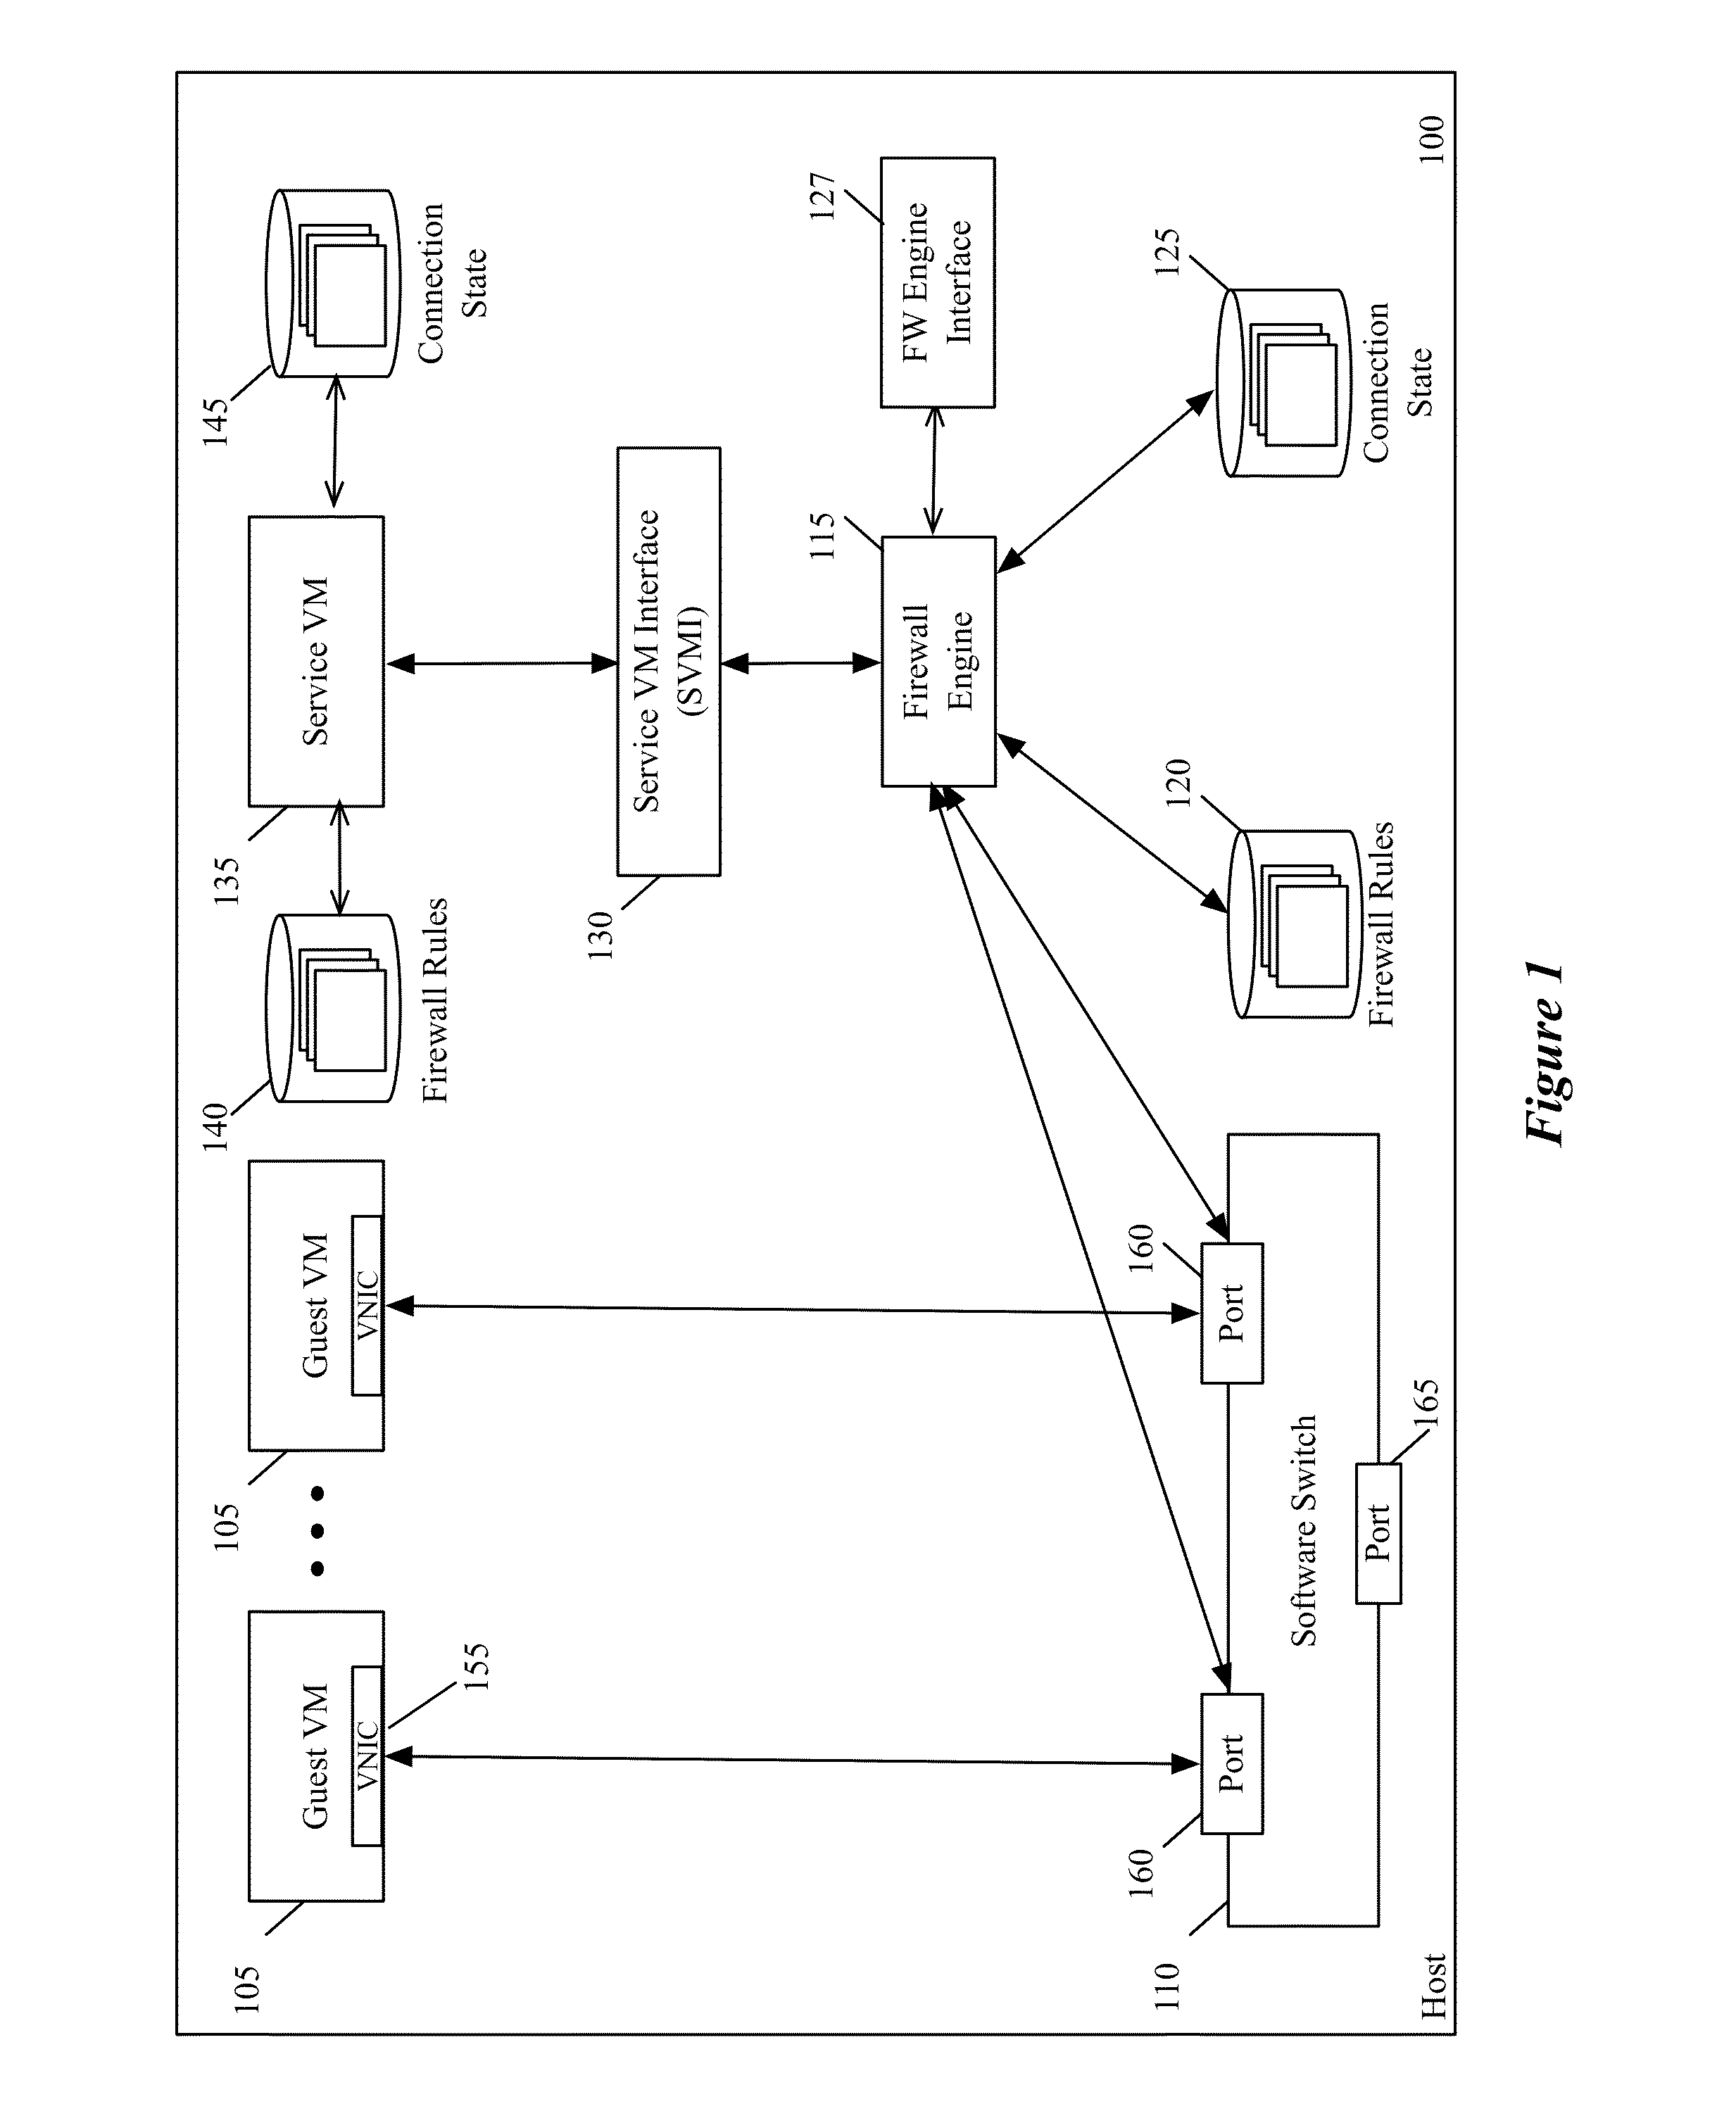 Method and apparatus for integrating a service virtual machine